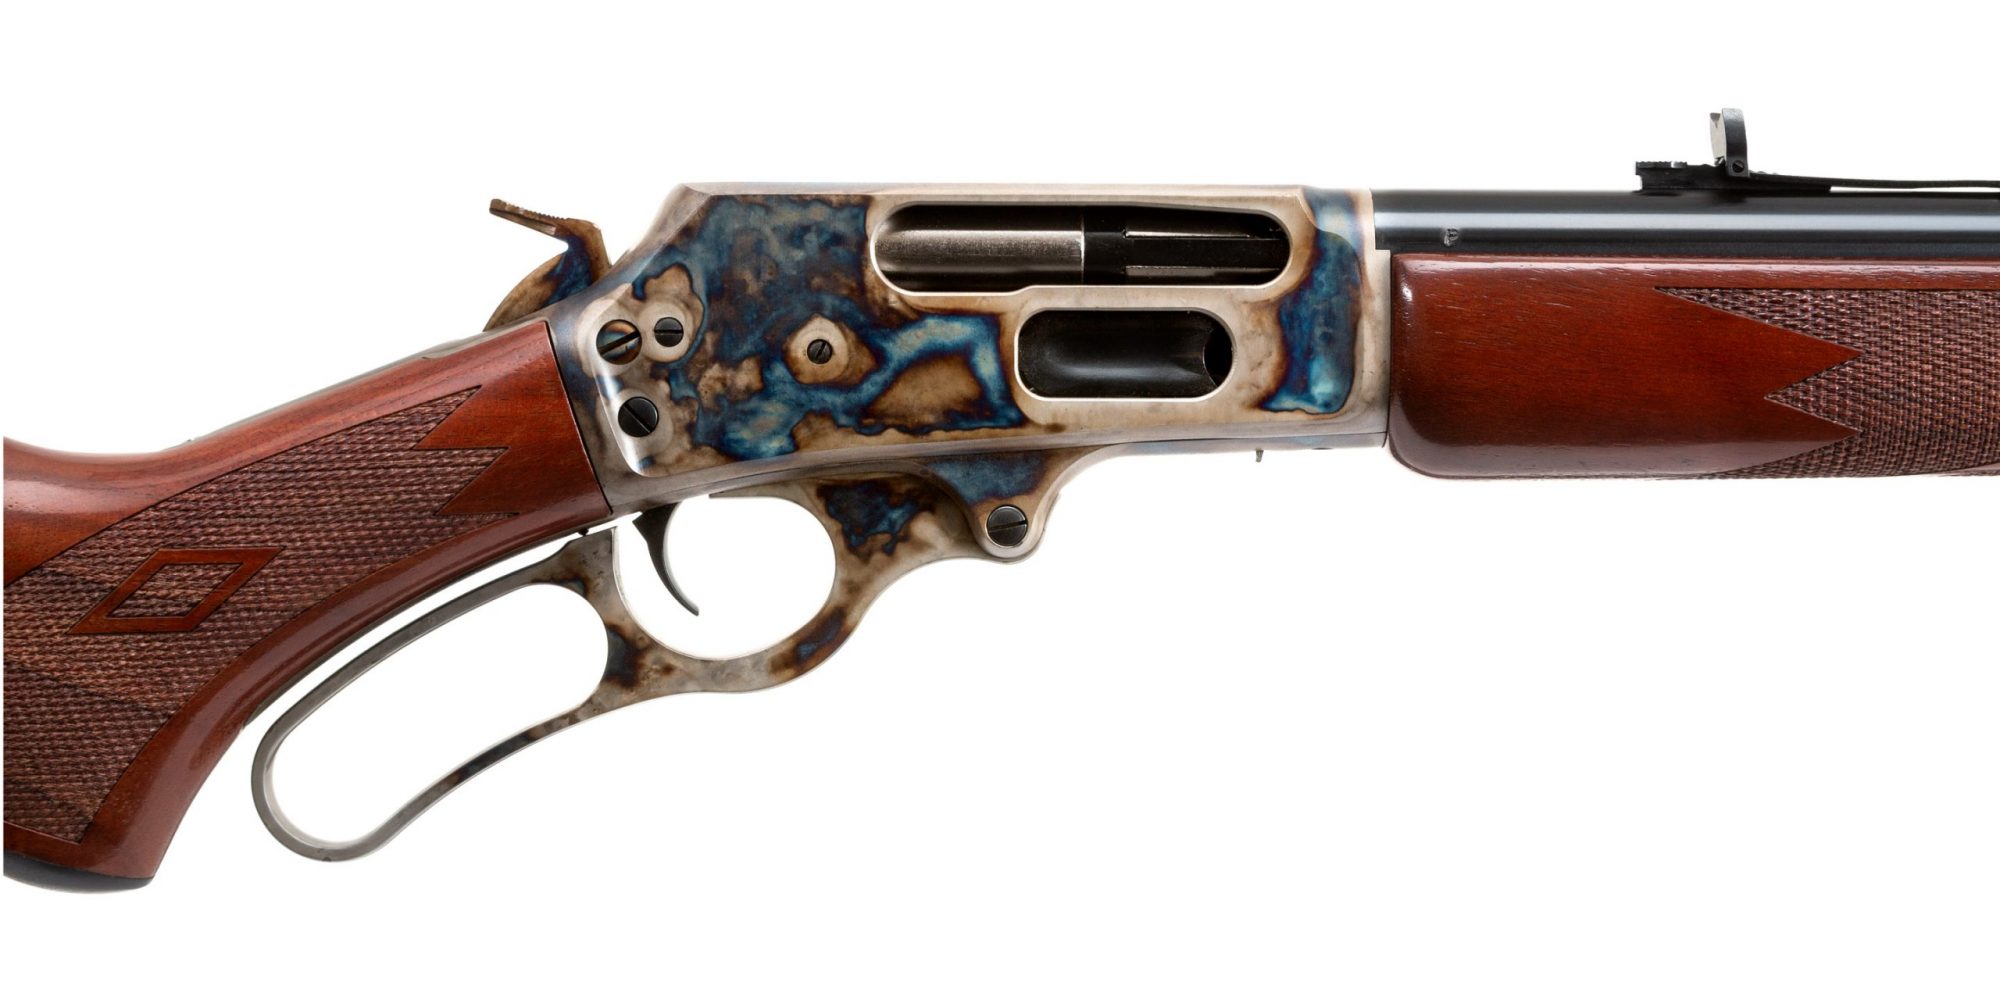 Photo of a Turnbull finished Marlin 1895 featuring bone charcoal color case hardening